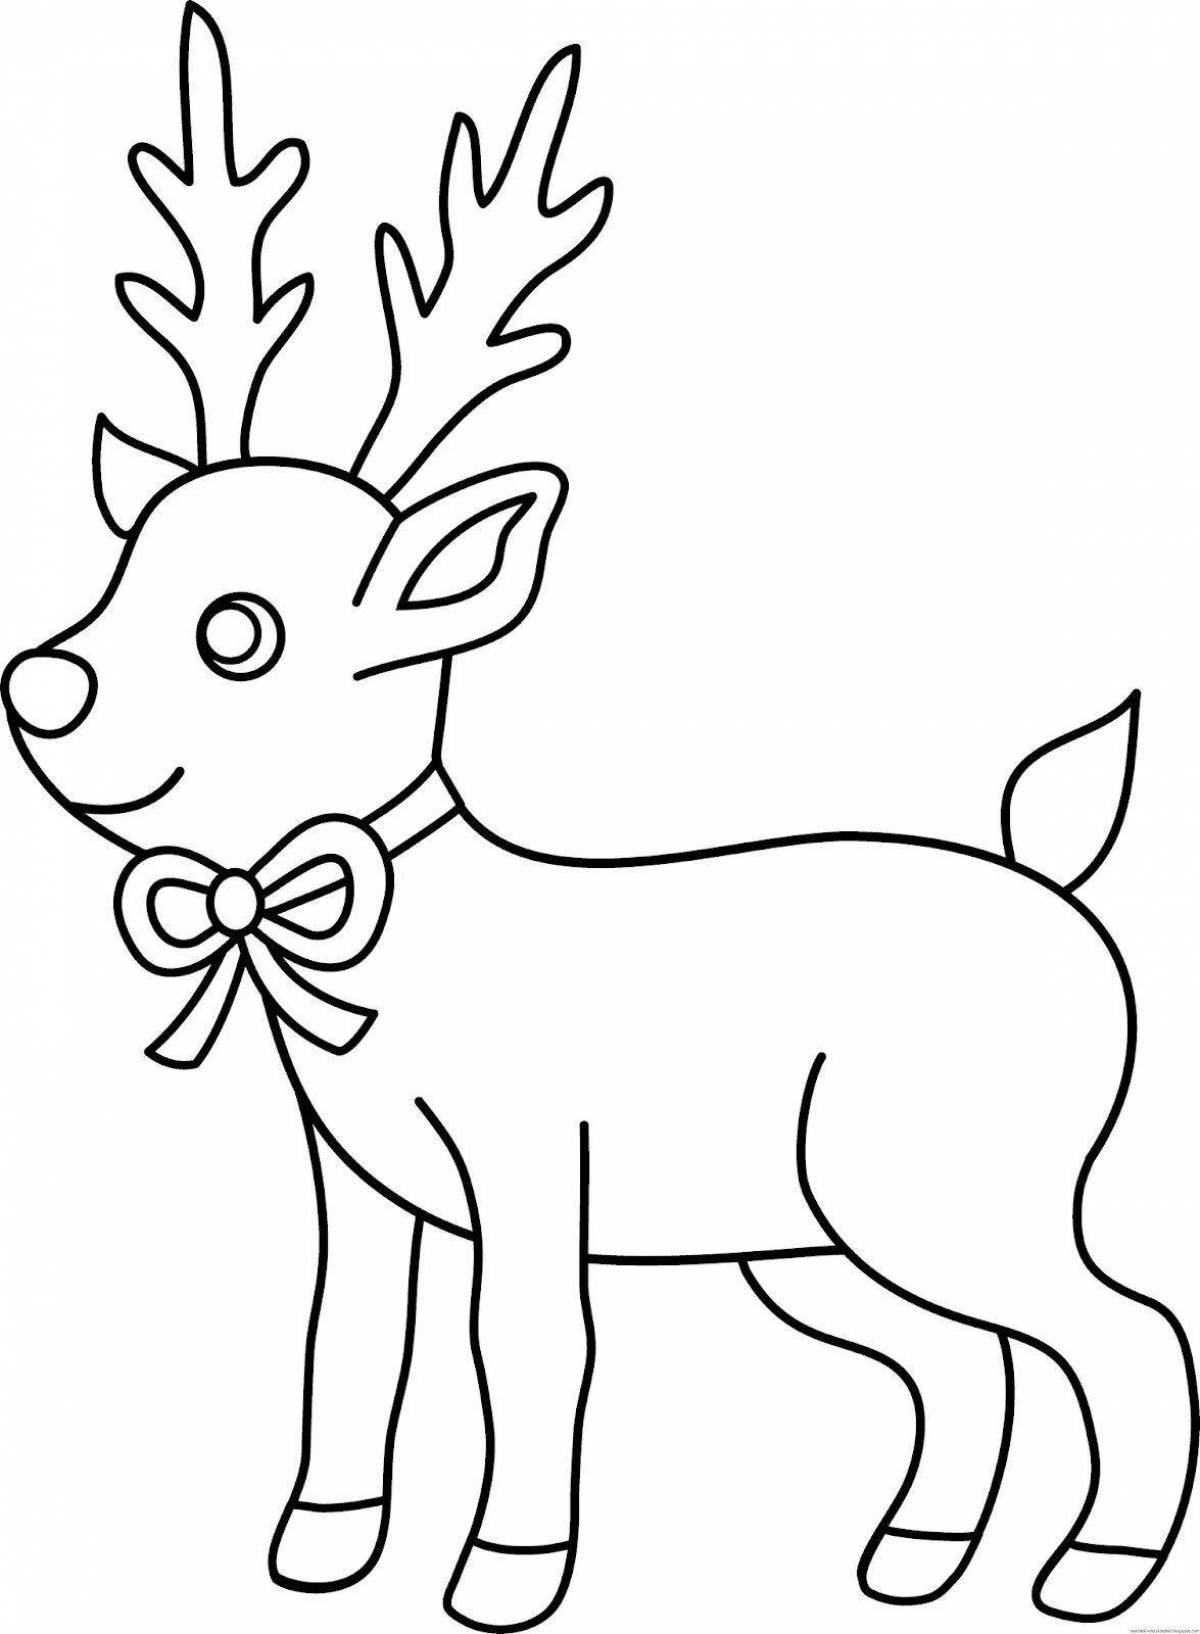 Christmas deer coloring page for kids